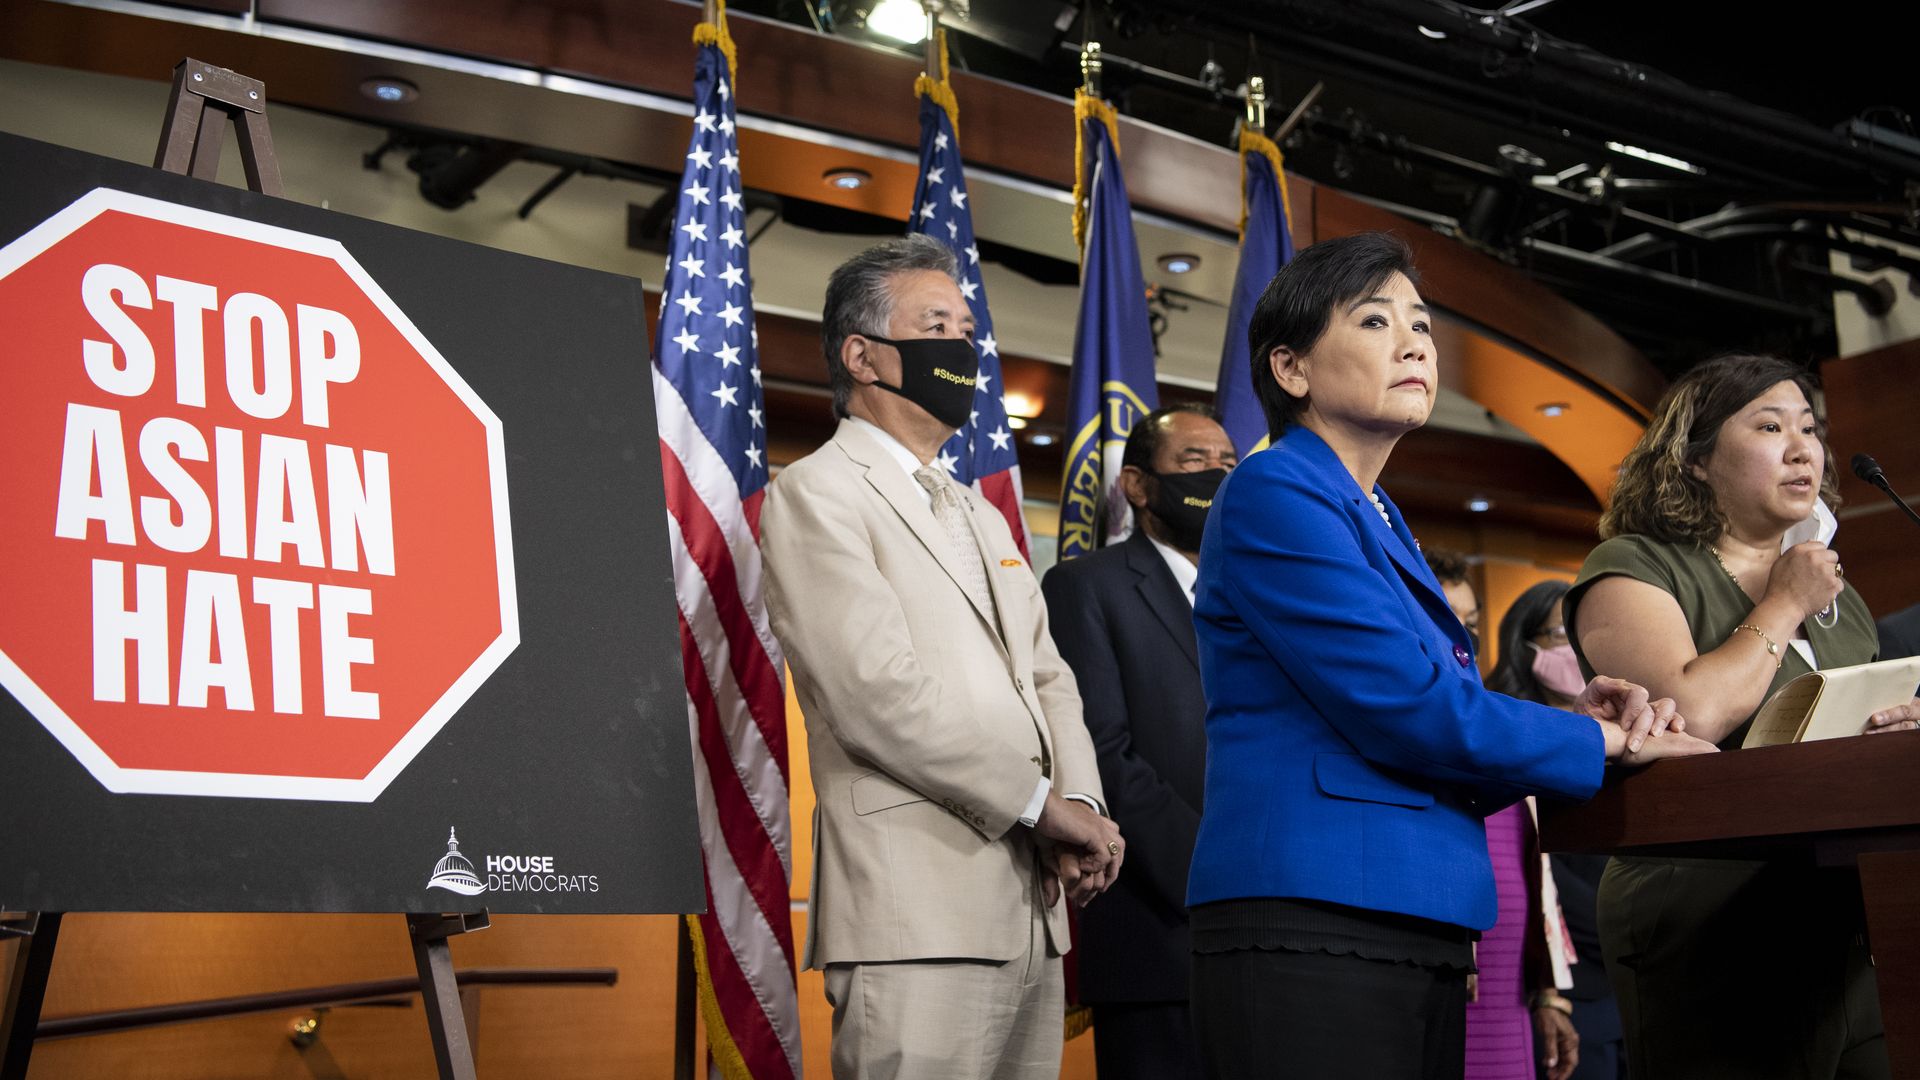 Photo of Asian American lawmakers standing at the podium with a sign that says "Stop Asian Hate" to their right